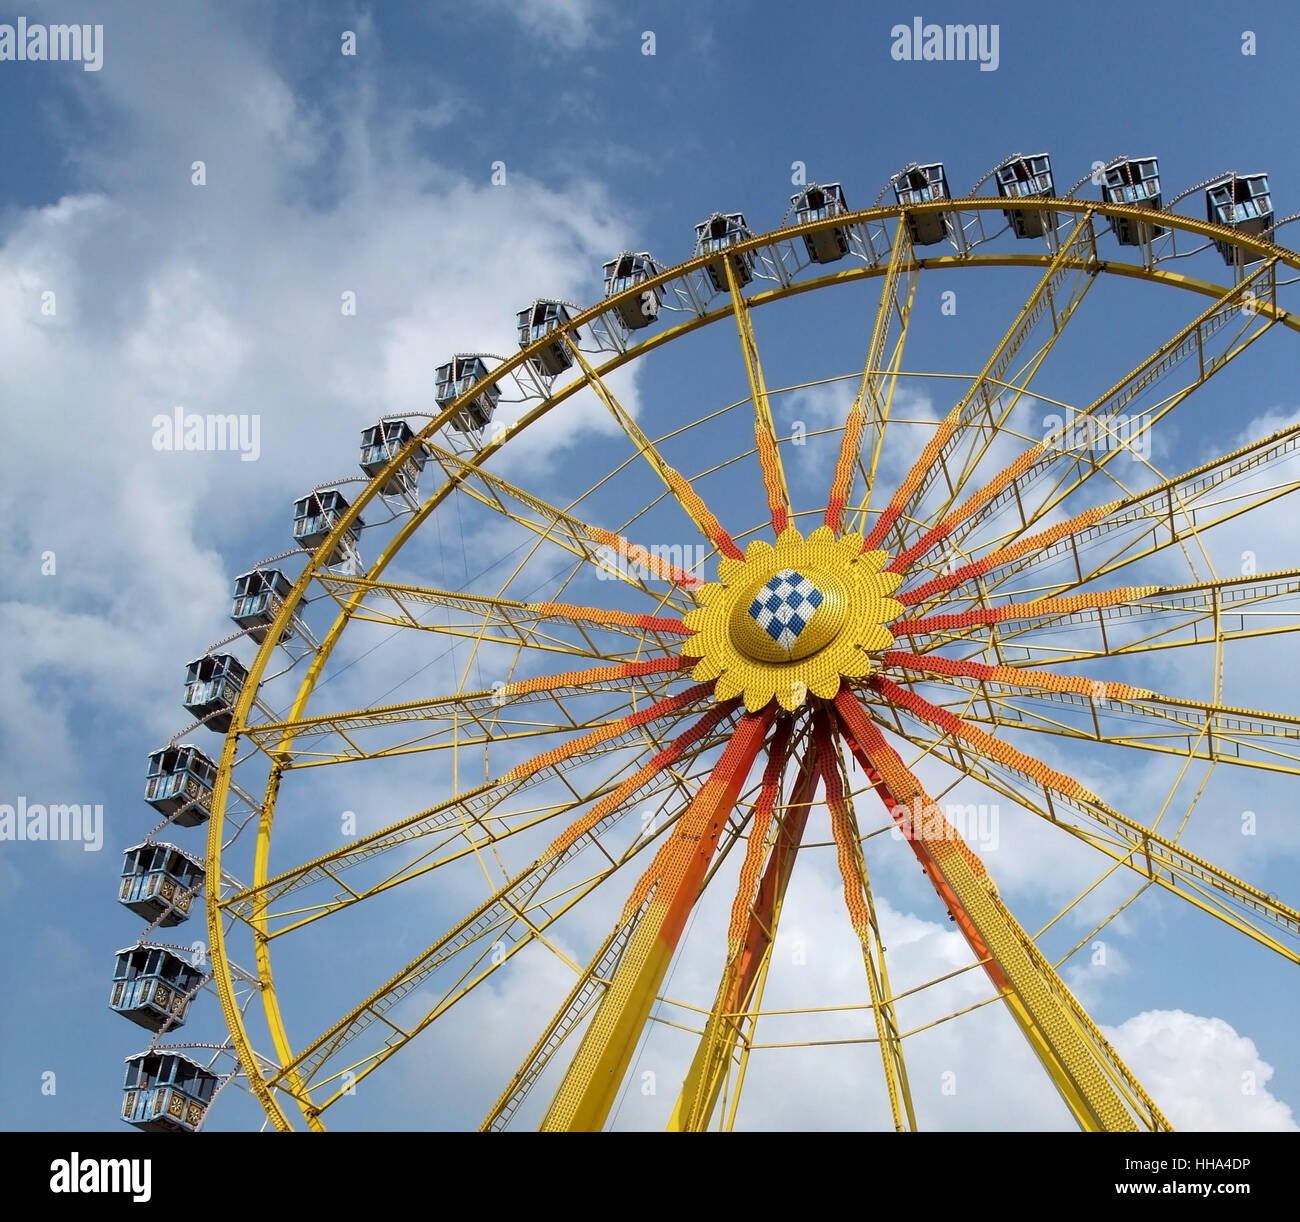 low angle detail of a big wheel in front of blue sky with some clouds Stock Photo